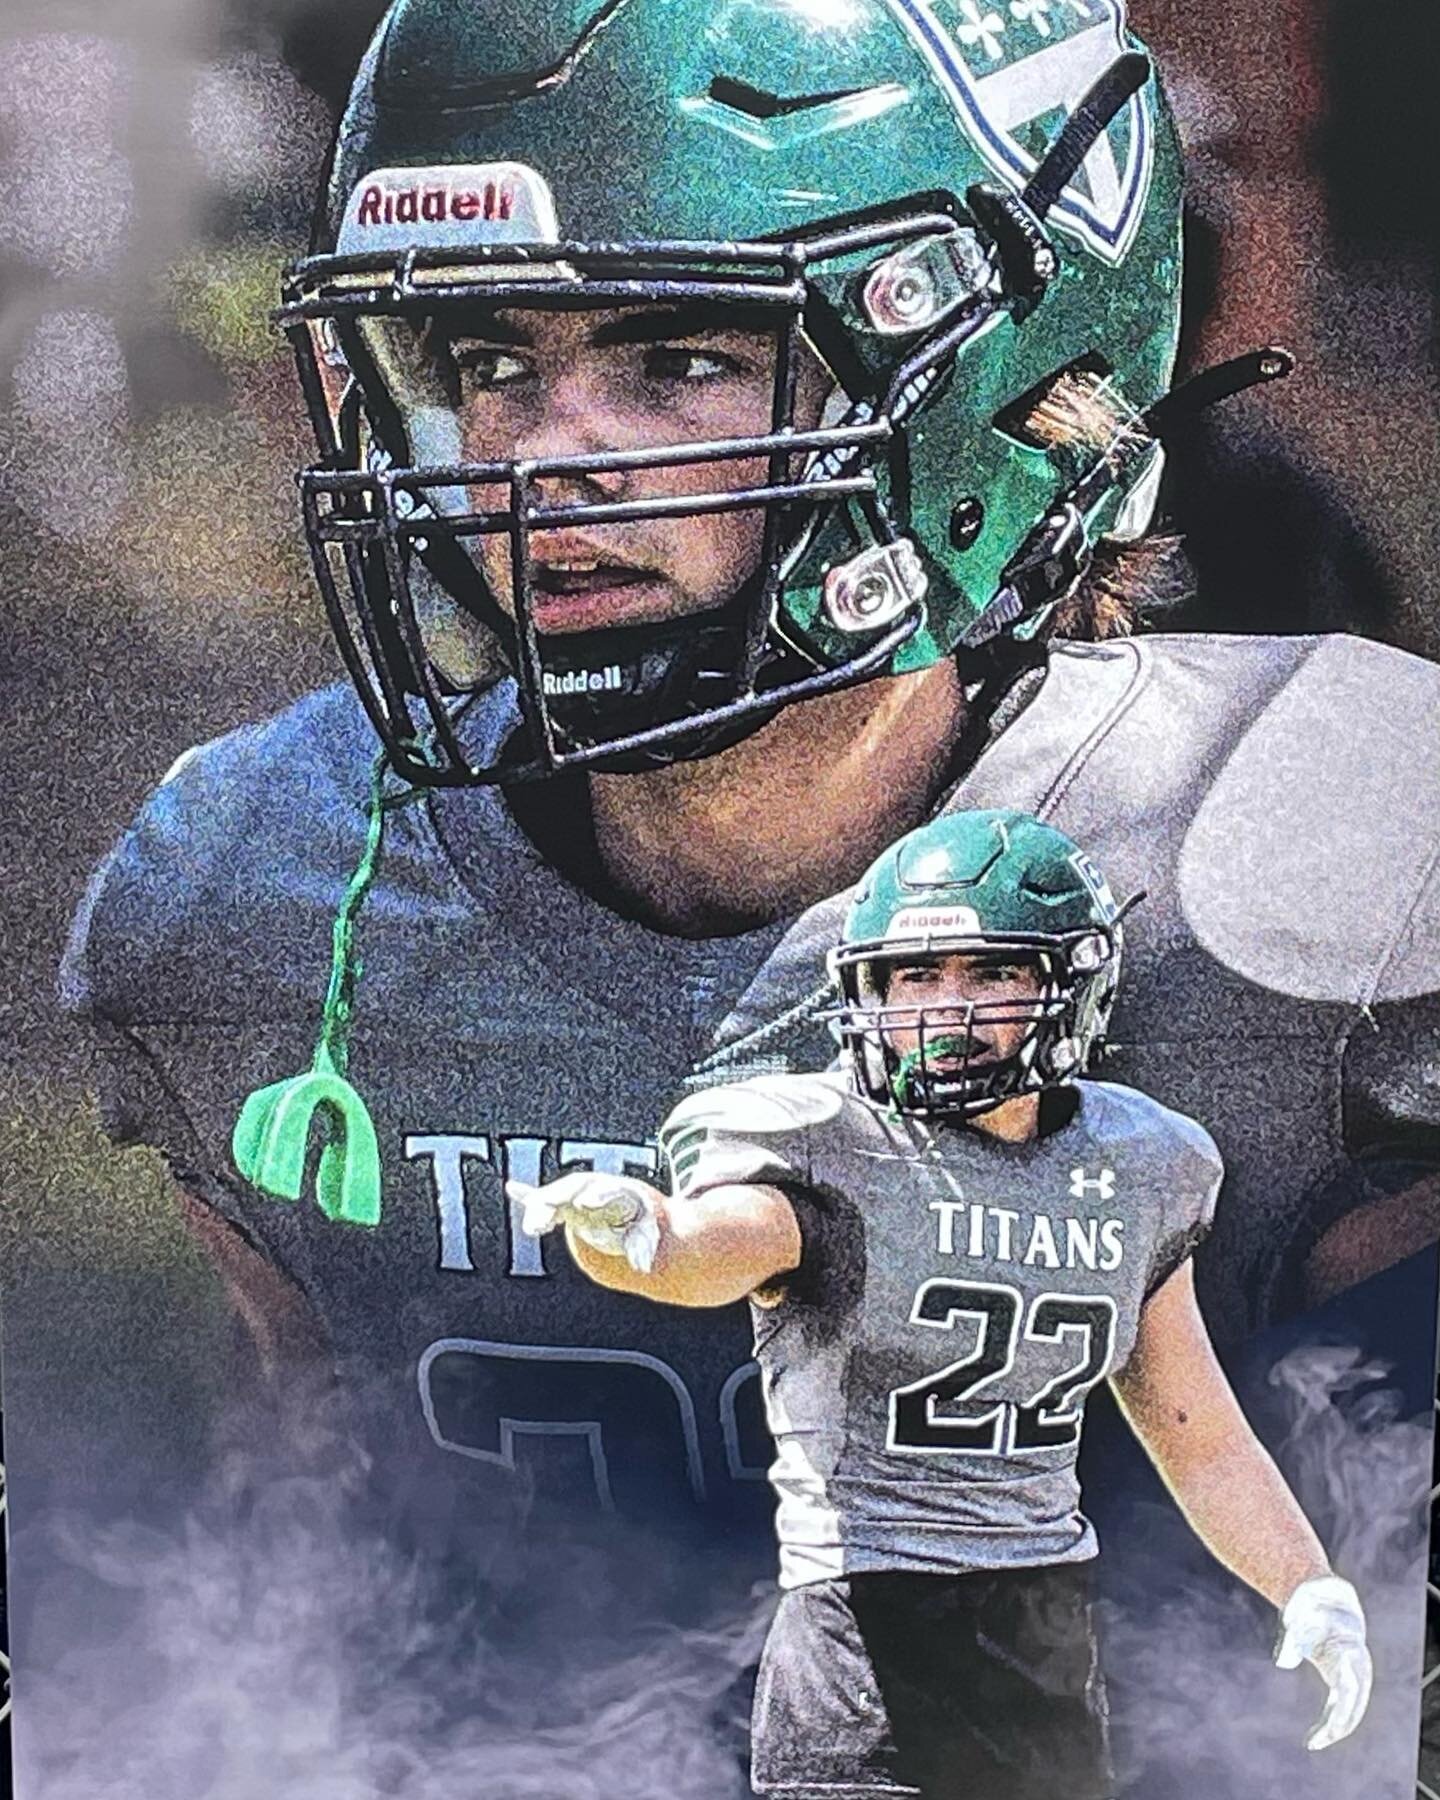 Spectacular TES Football Senior Day. Thank you to all the Junior families that made this event so special. Check out these badass team posters AND the most important part the TITANS PREVAILED!!!